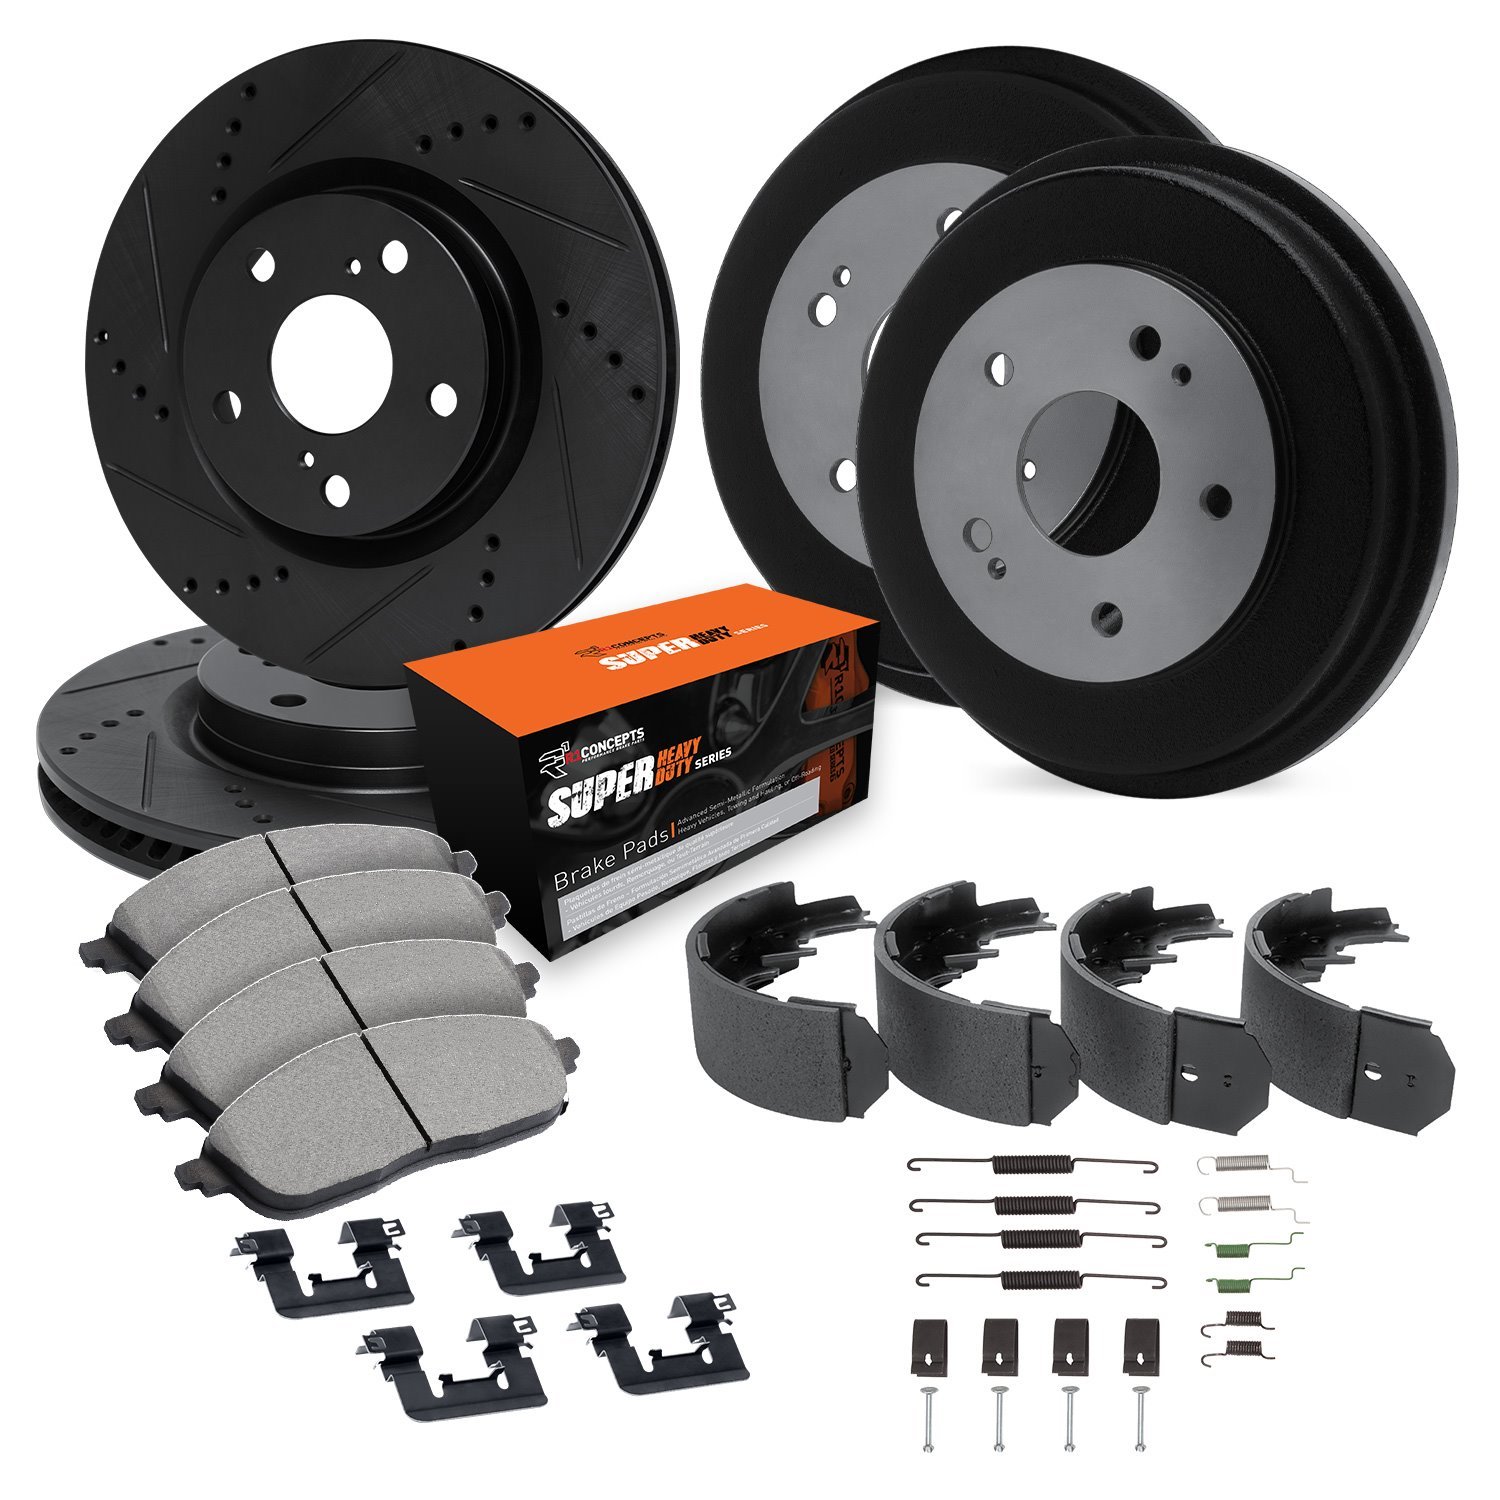 E-Line Drilled/Slotted Black Rotor & Drum Set w/Super-Duty Pads, Shoes, Hardware/Adjusters, 1994-1994 Ford/Lincoln/Mercury/Mazda